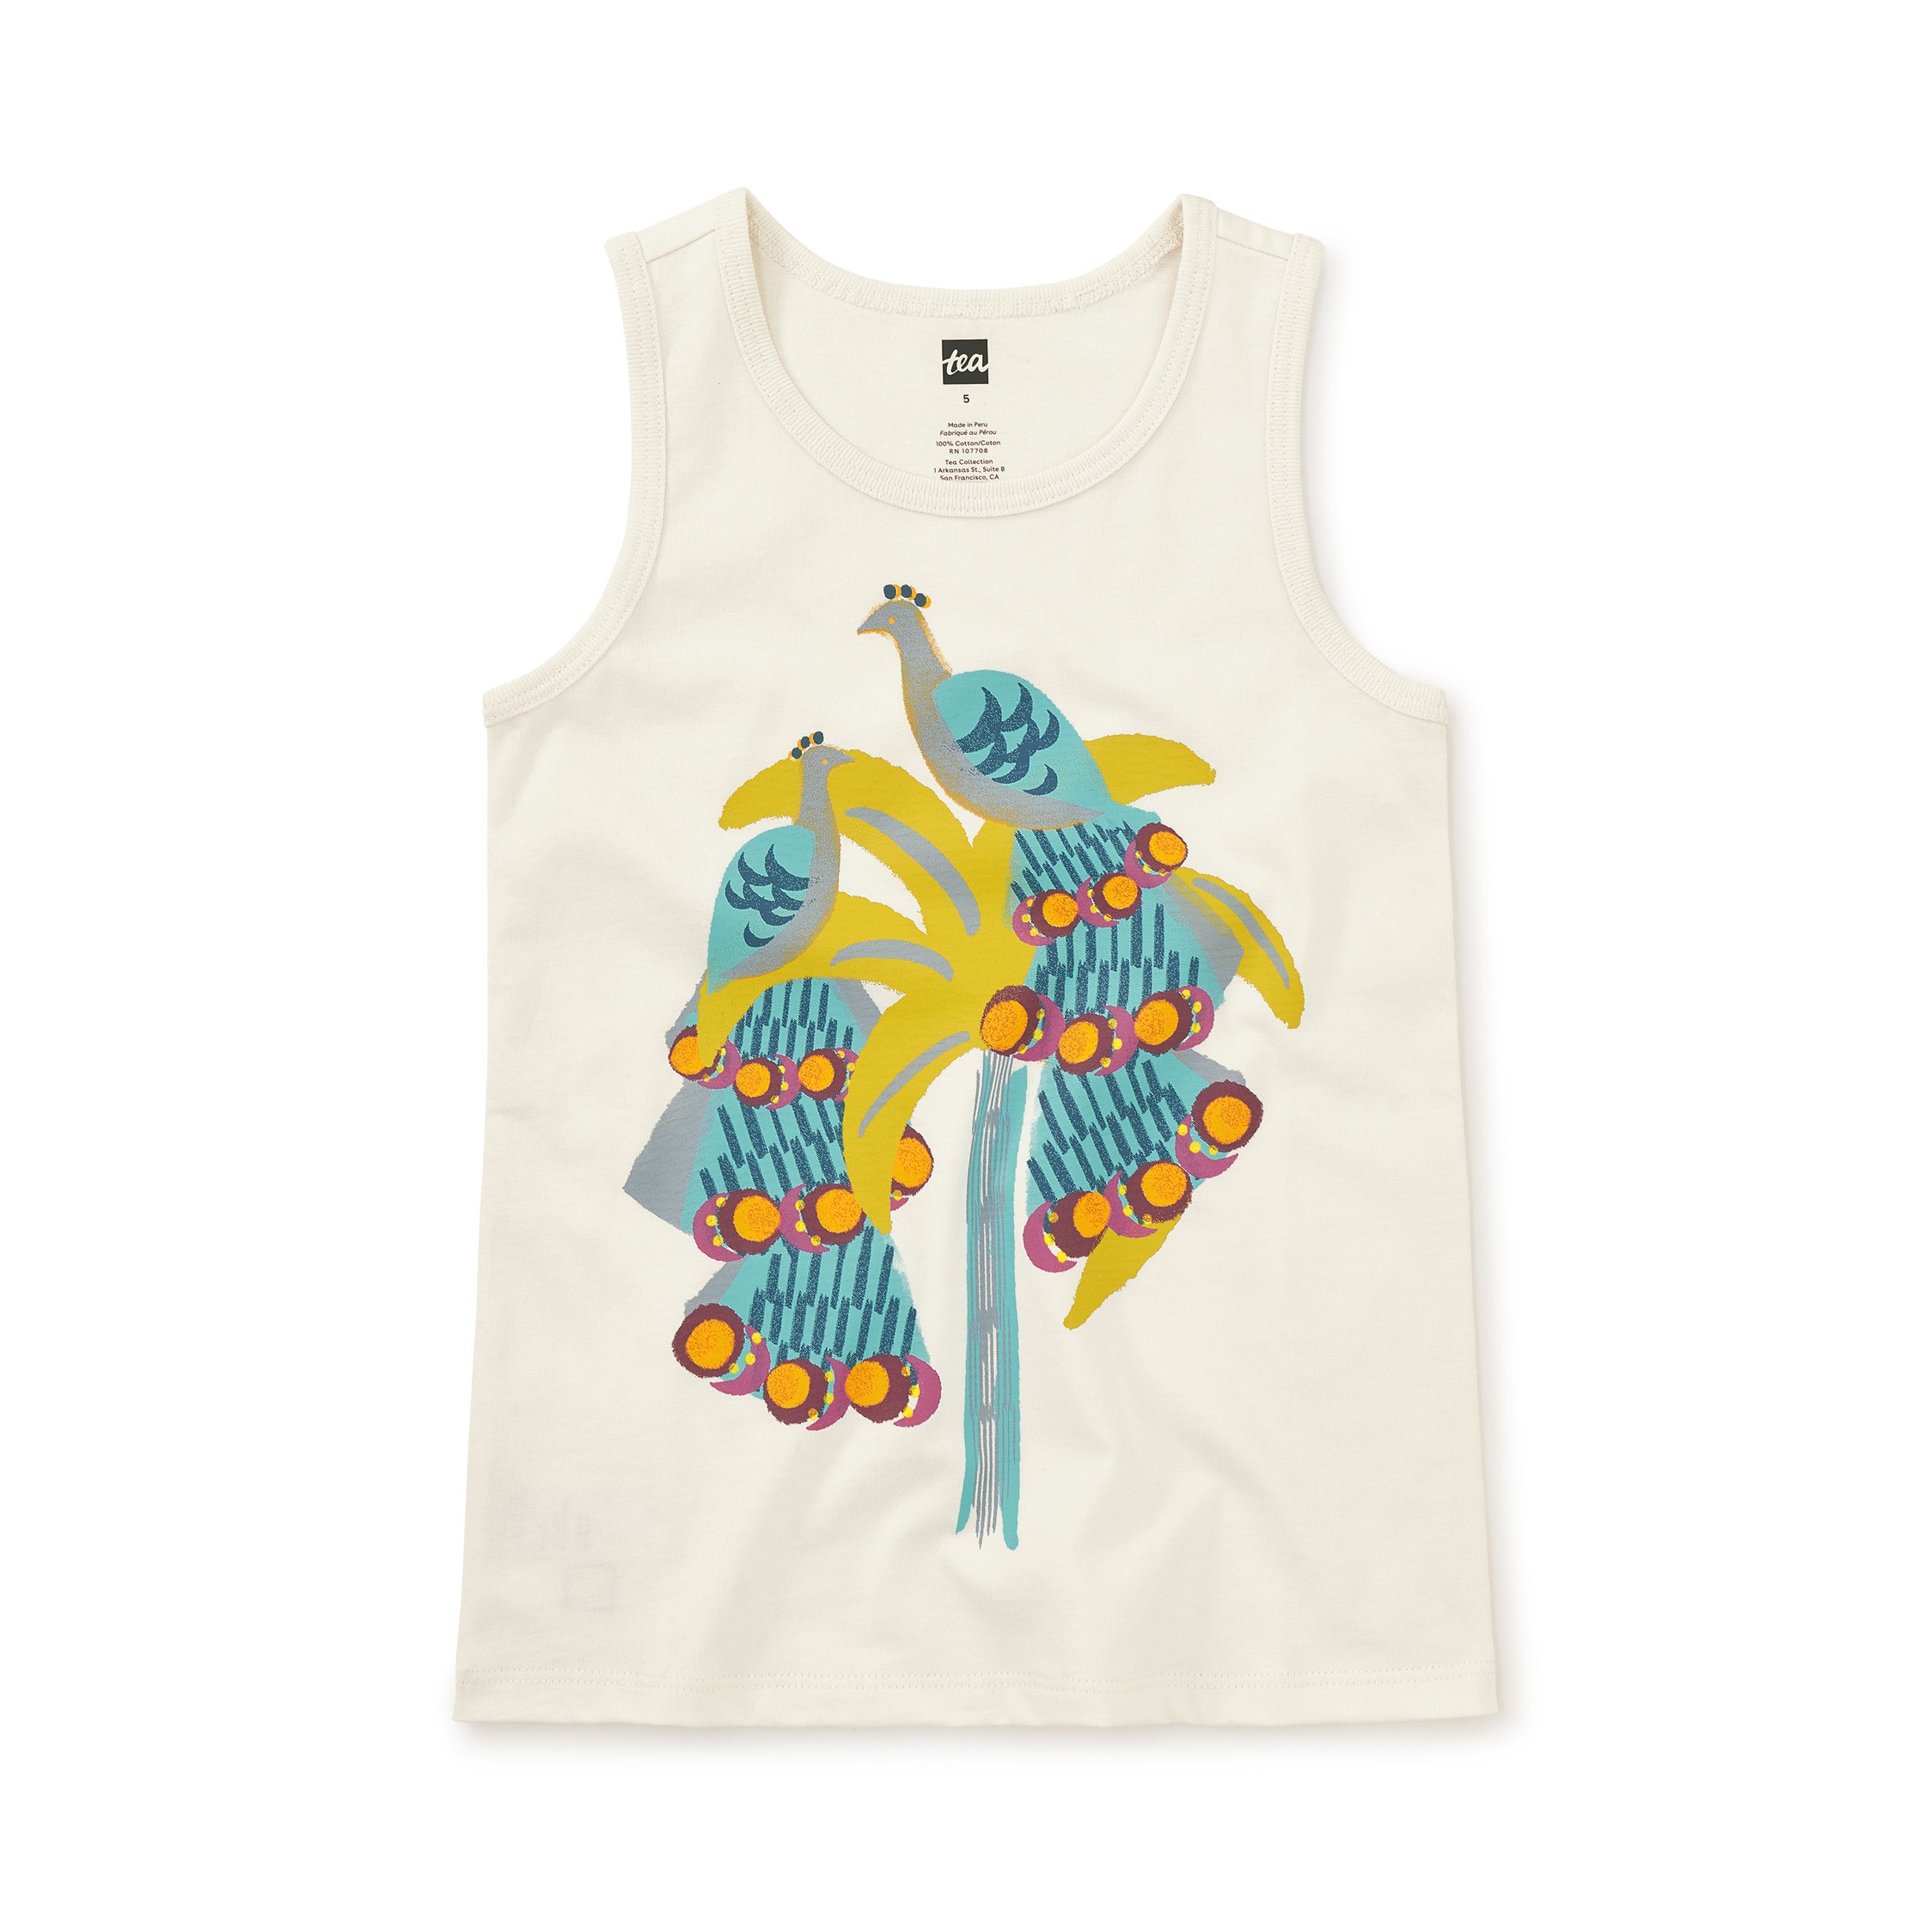 Pearched Peacocks Tank Top